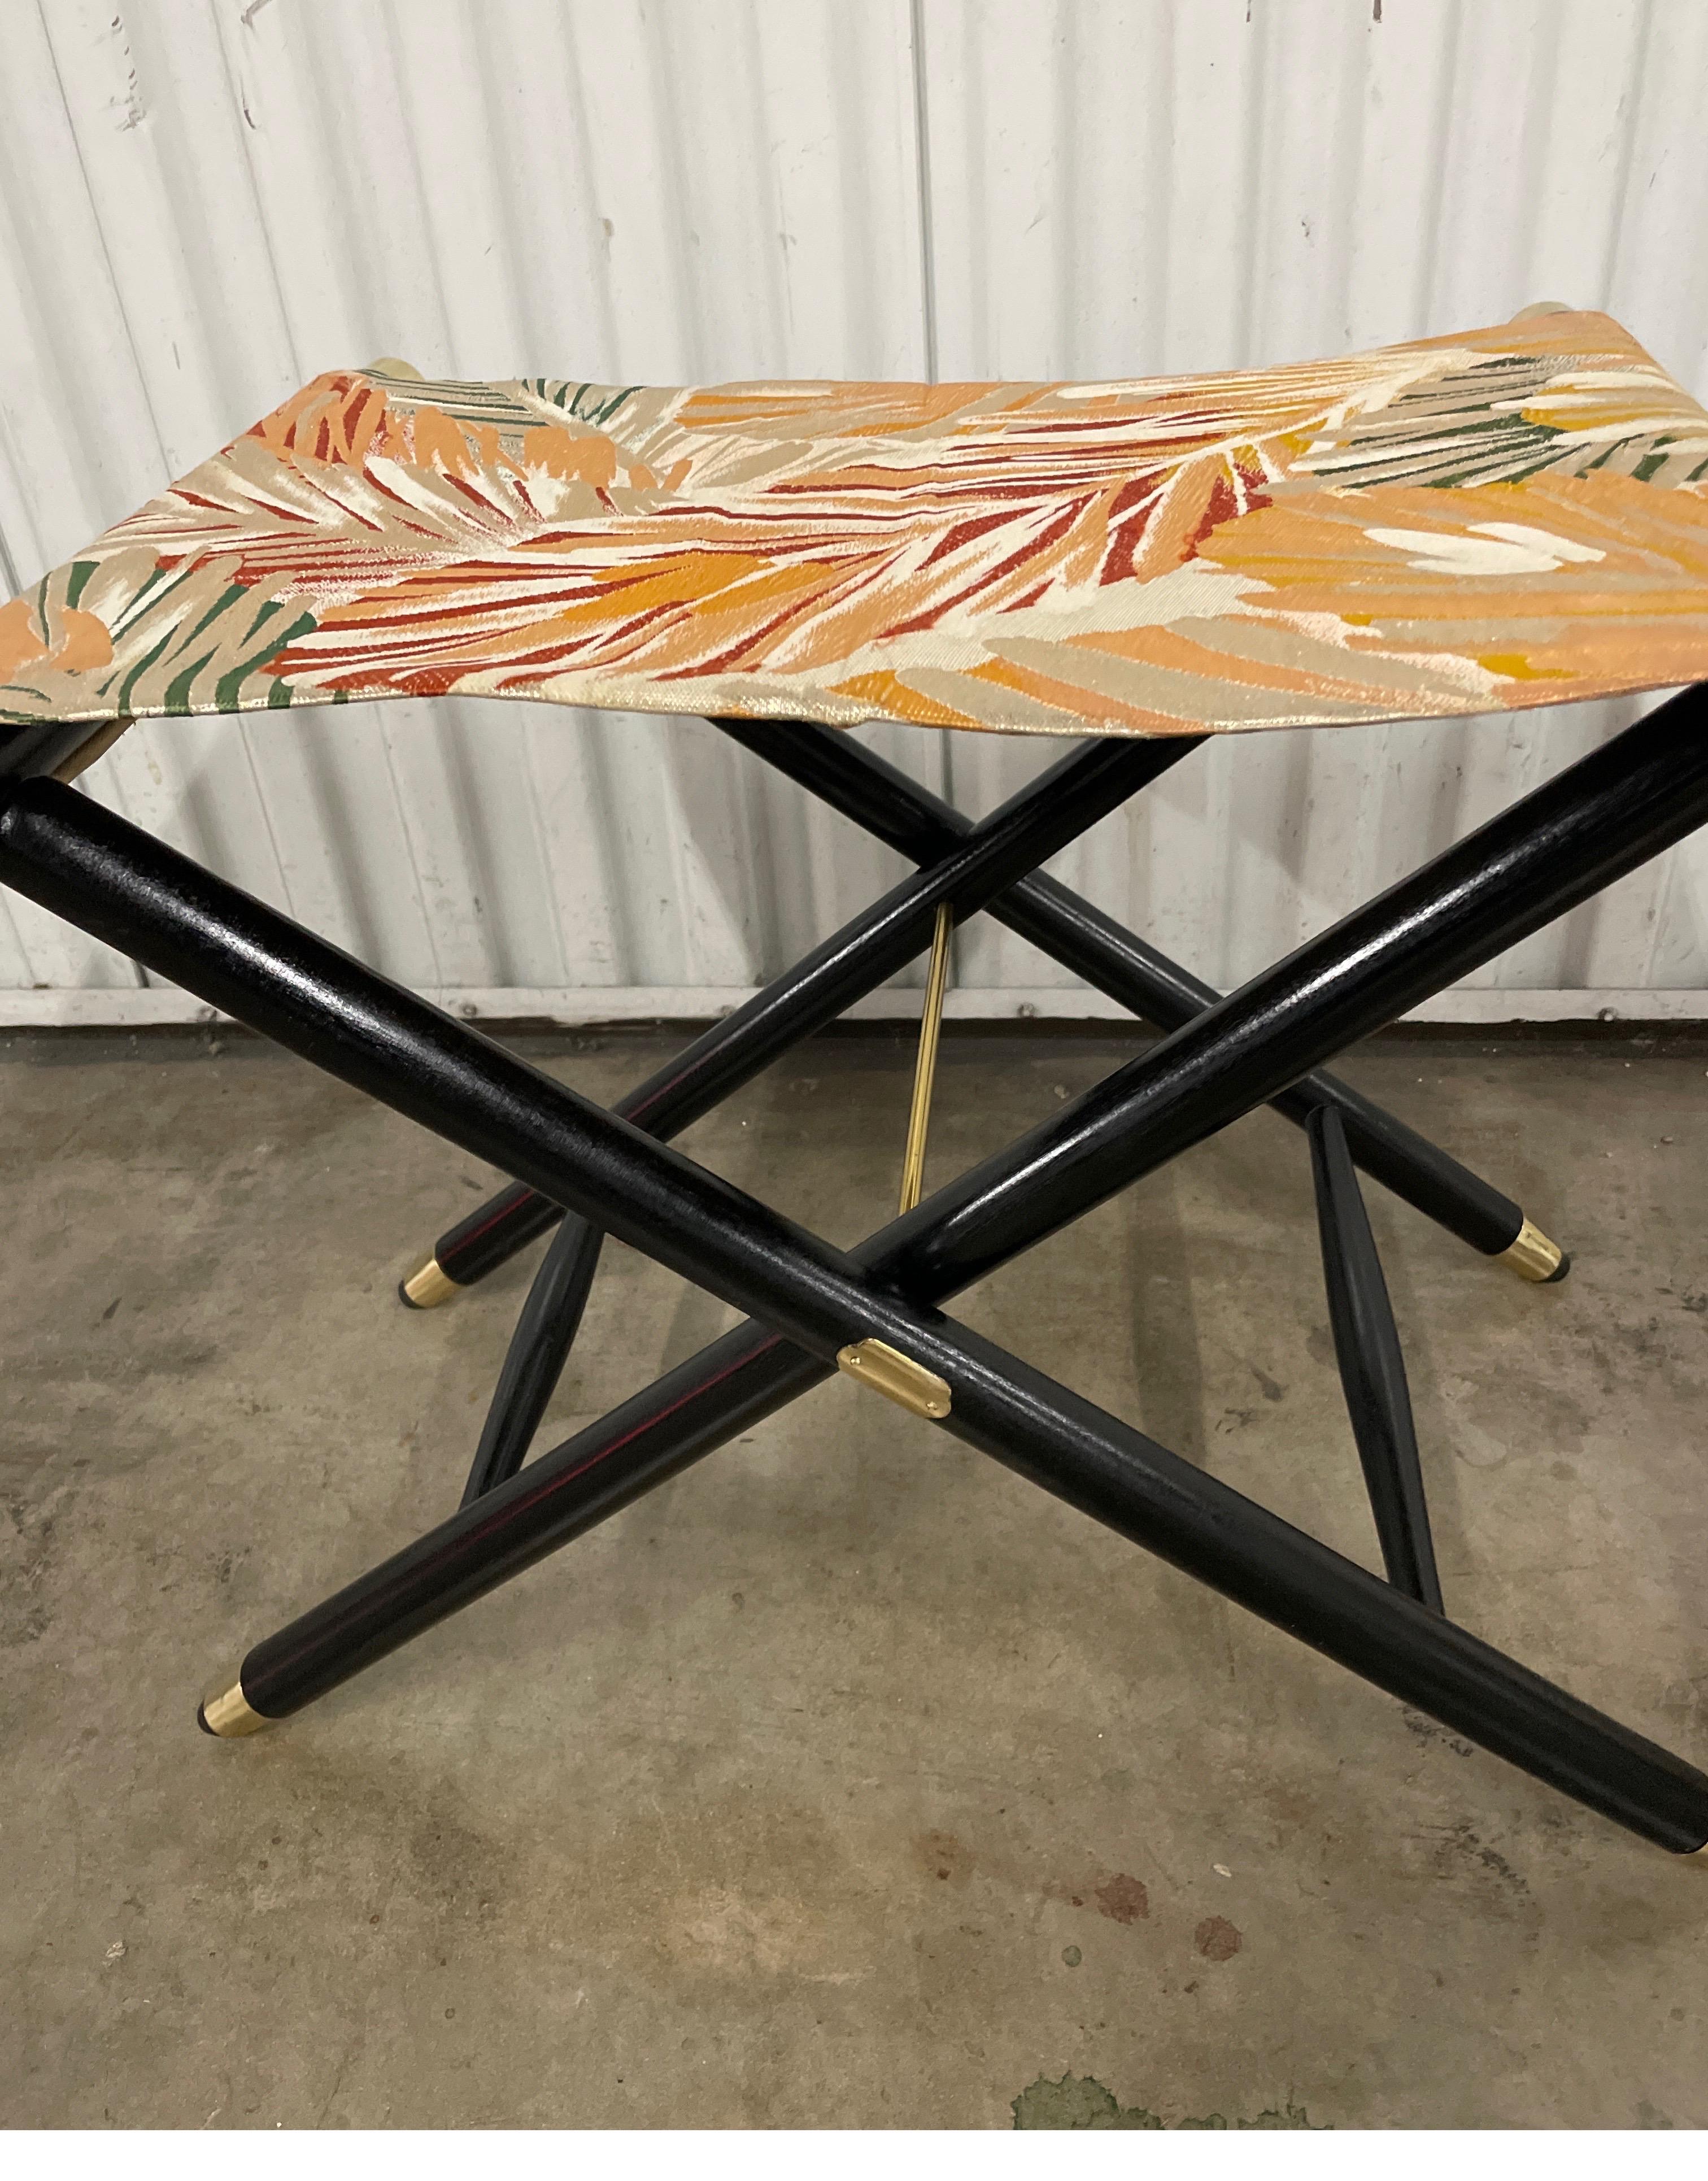 Pair of Vintage Japanese Obi Covered Folding Stools In Good Condition For Sale In West Palm Beach, FL